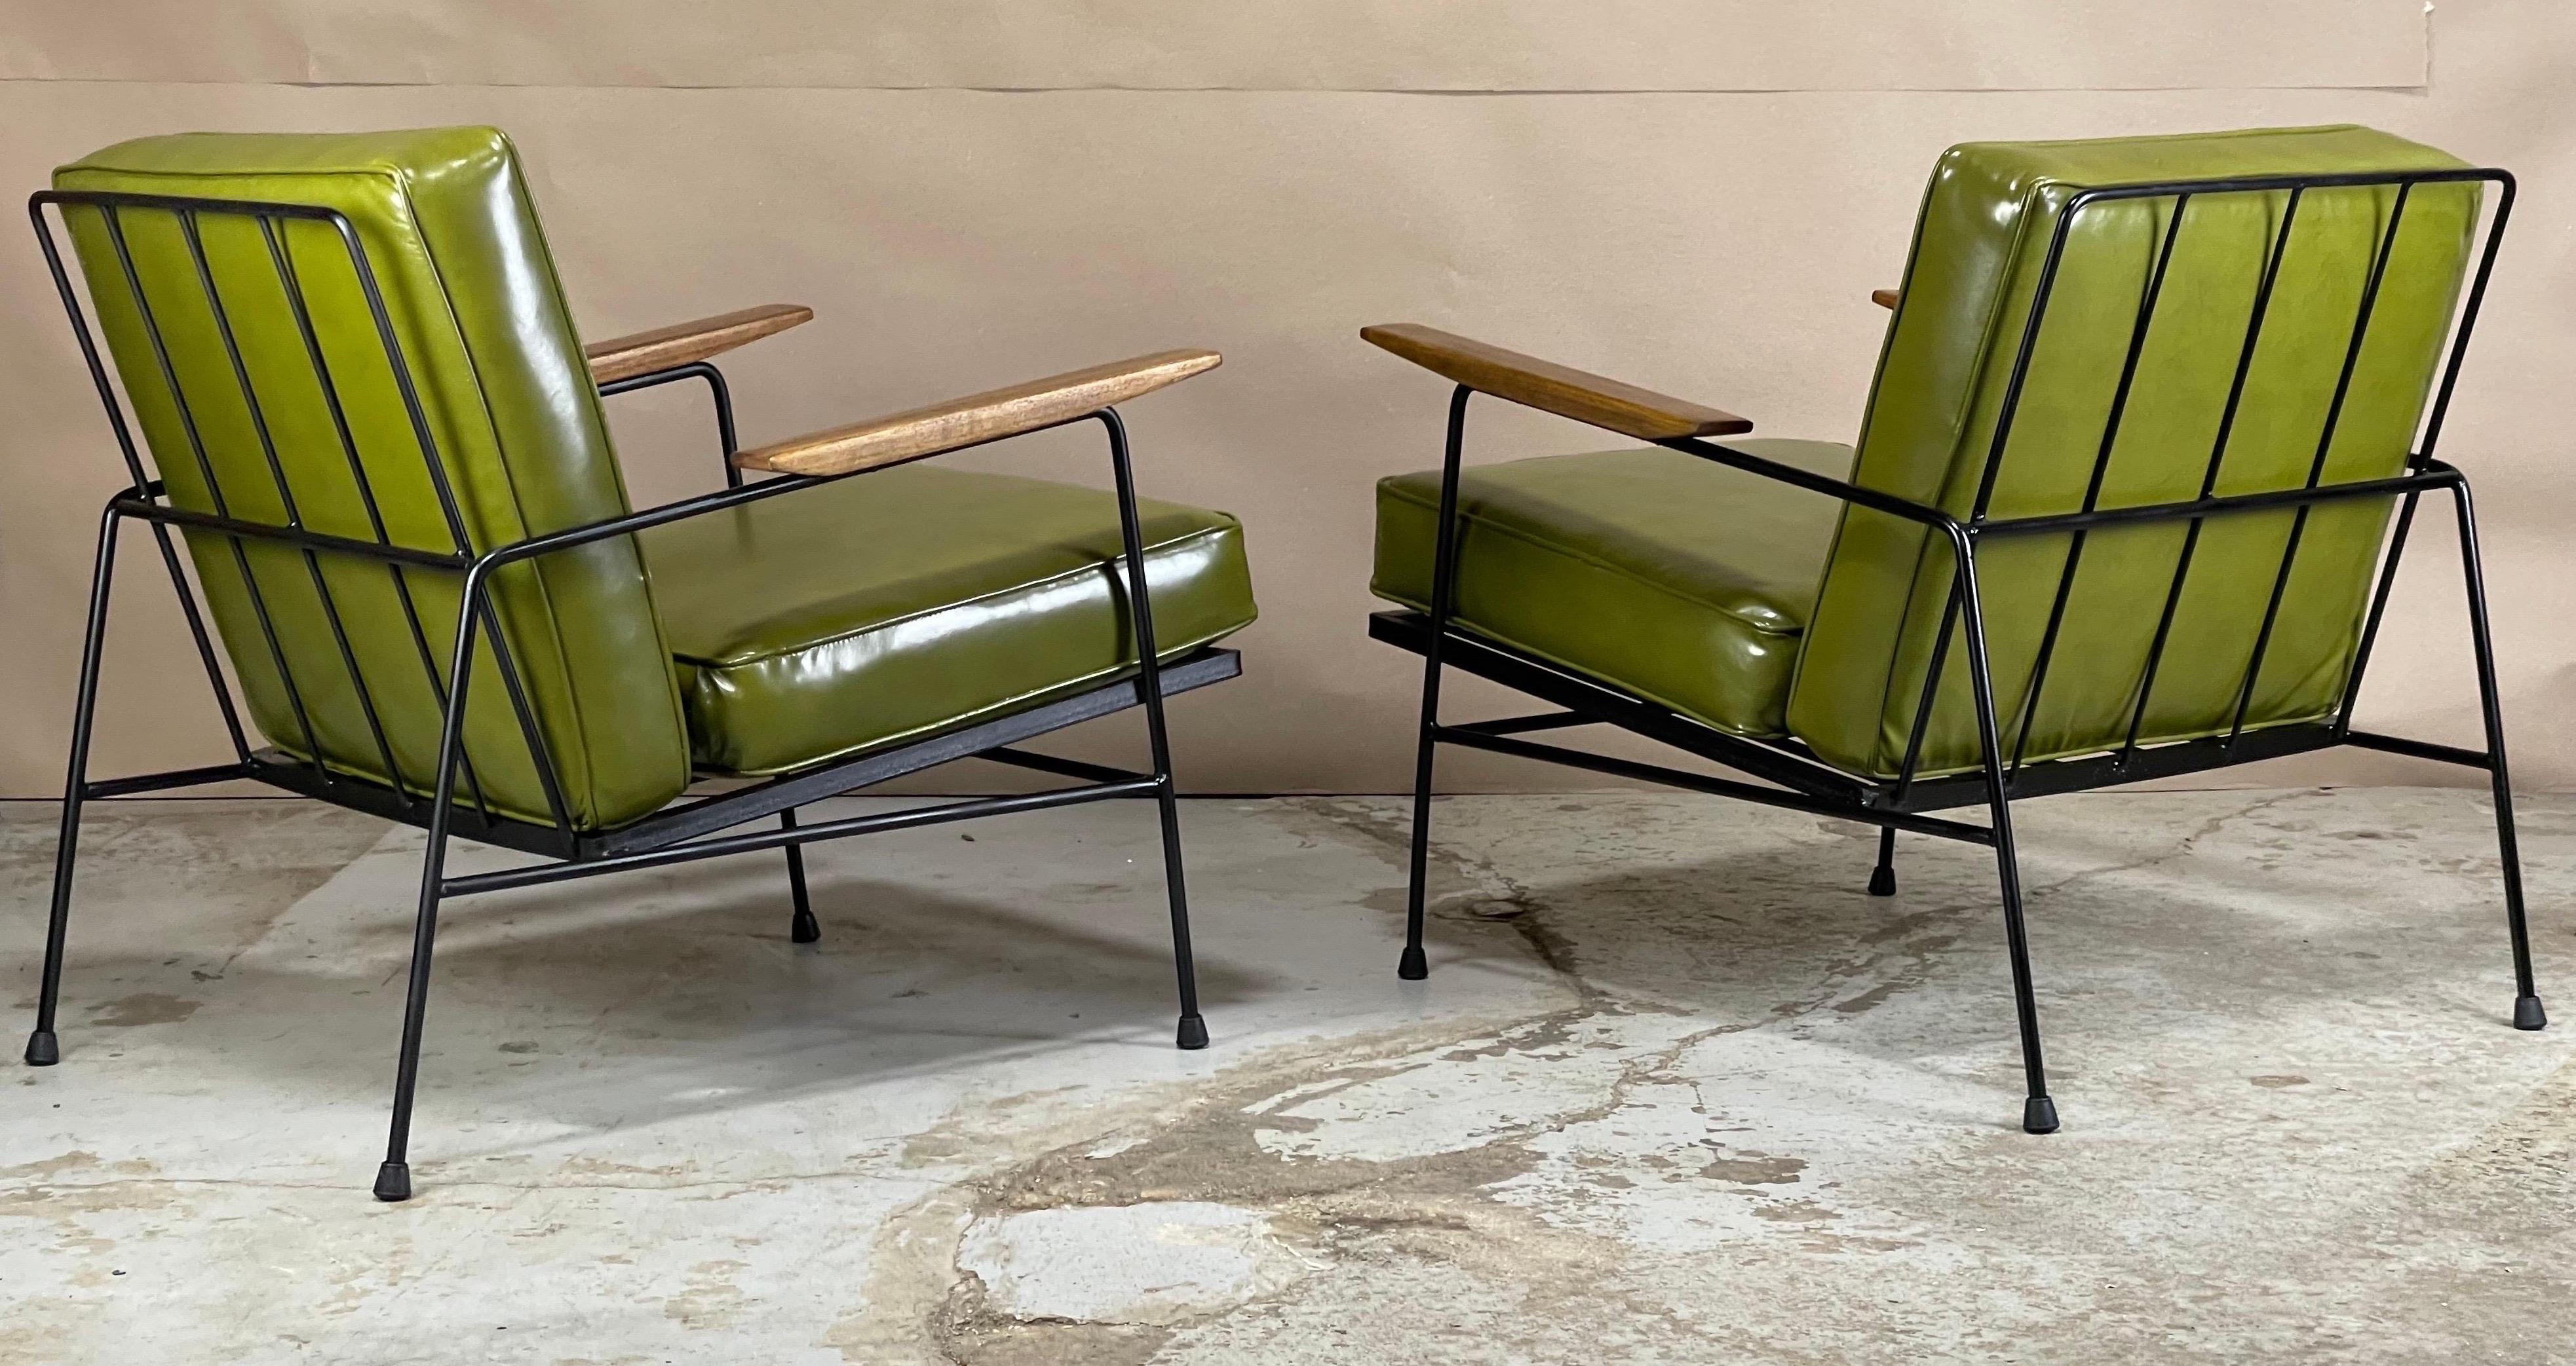 Mid-20th Century Mid-Century Lounge Chairs by Max Stout 1959  For Sale